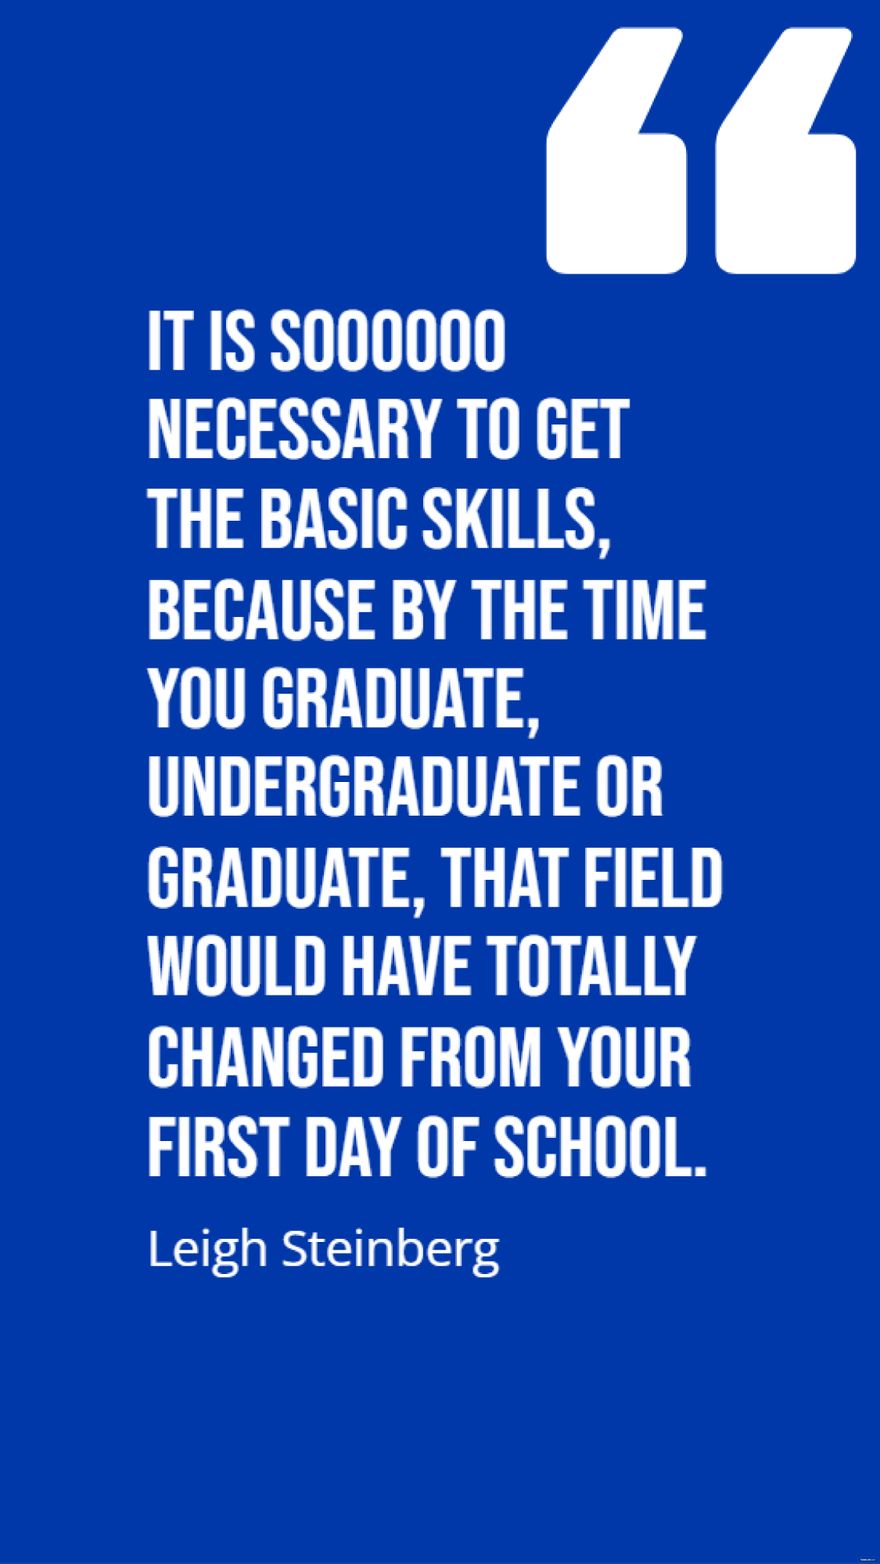 Leigh Steinberg - It is soooooo necessary to get the basic skills, because by the time you graduate, undergraduate or graduate, that field would have totally changed from your first day of school. in JPG